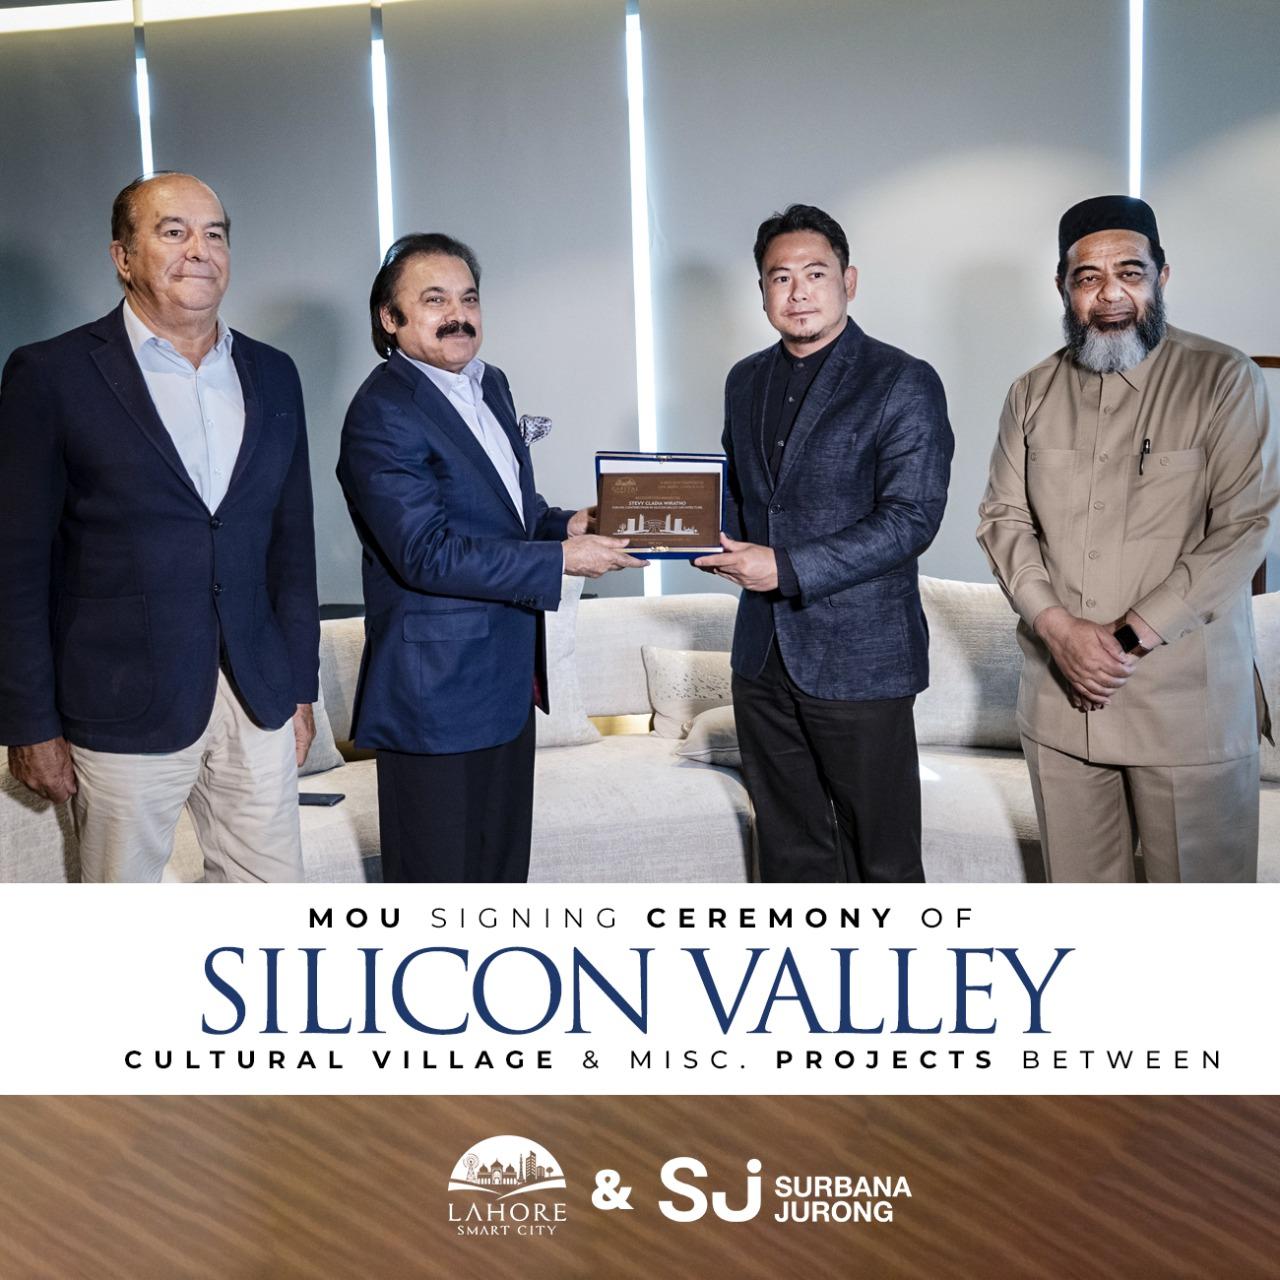 MOU Singing Ceremony of Silicon Valley